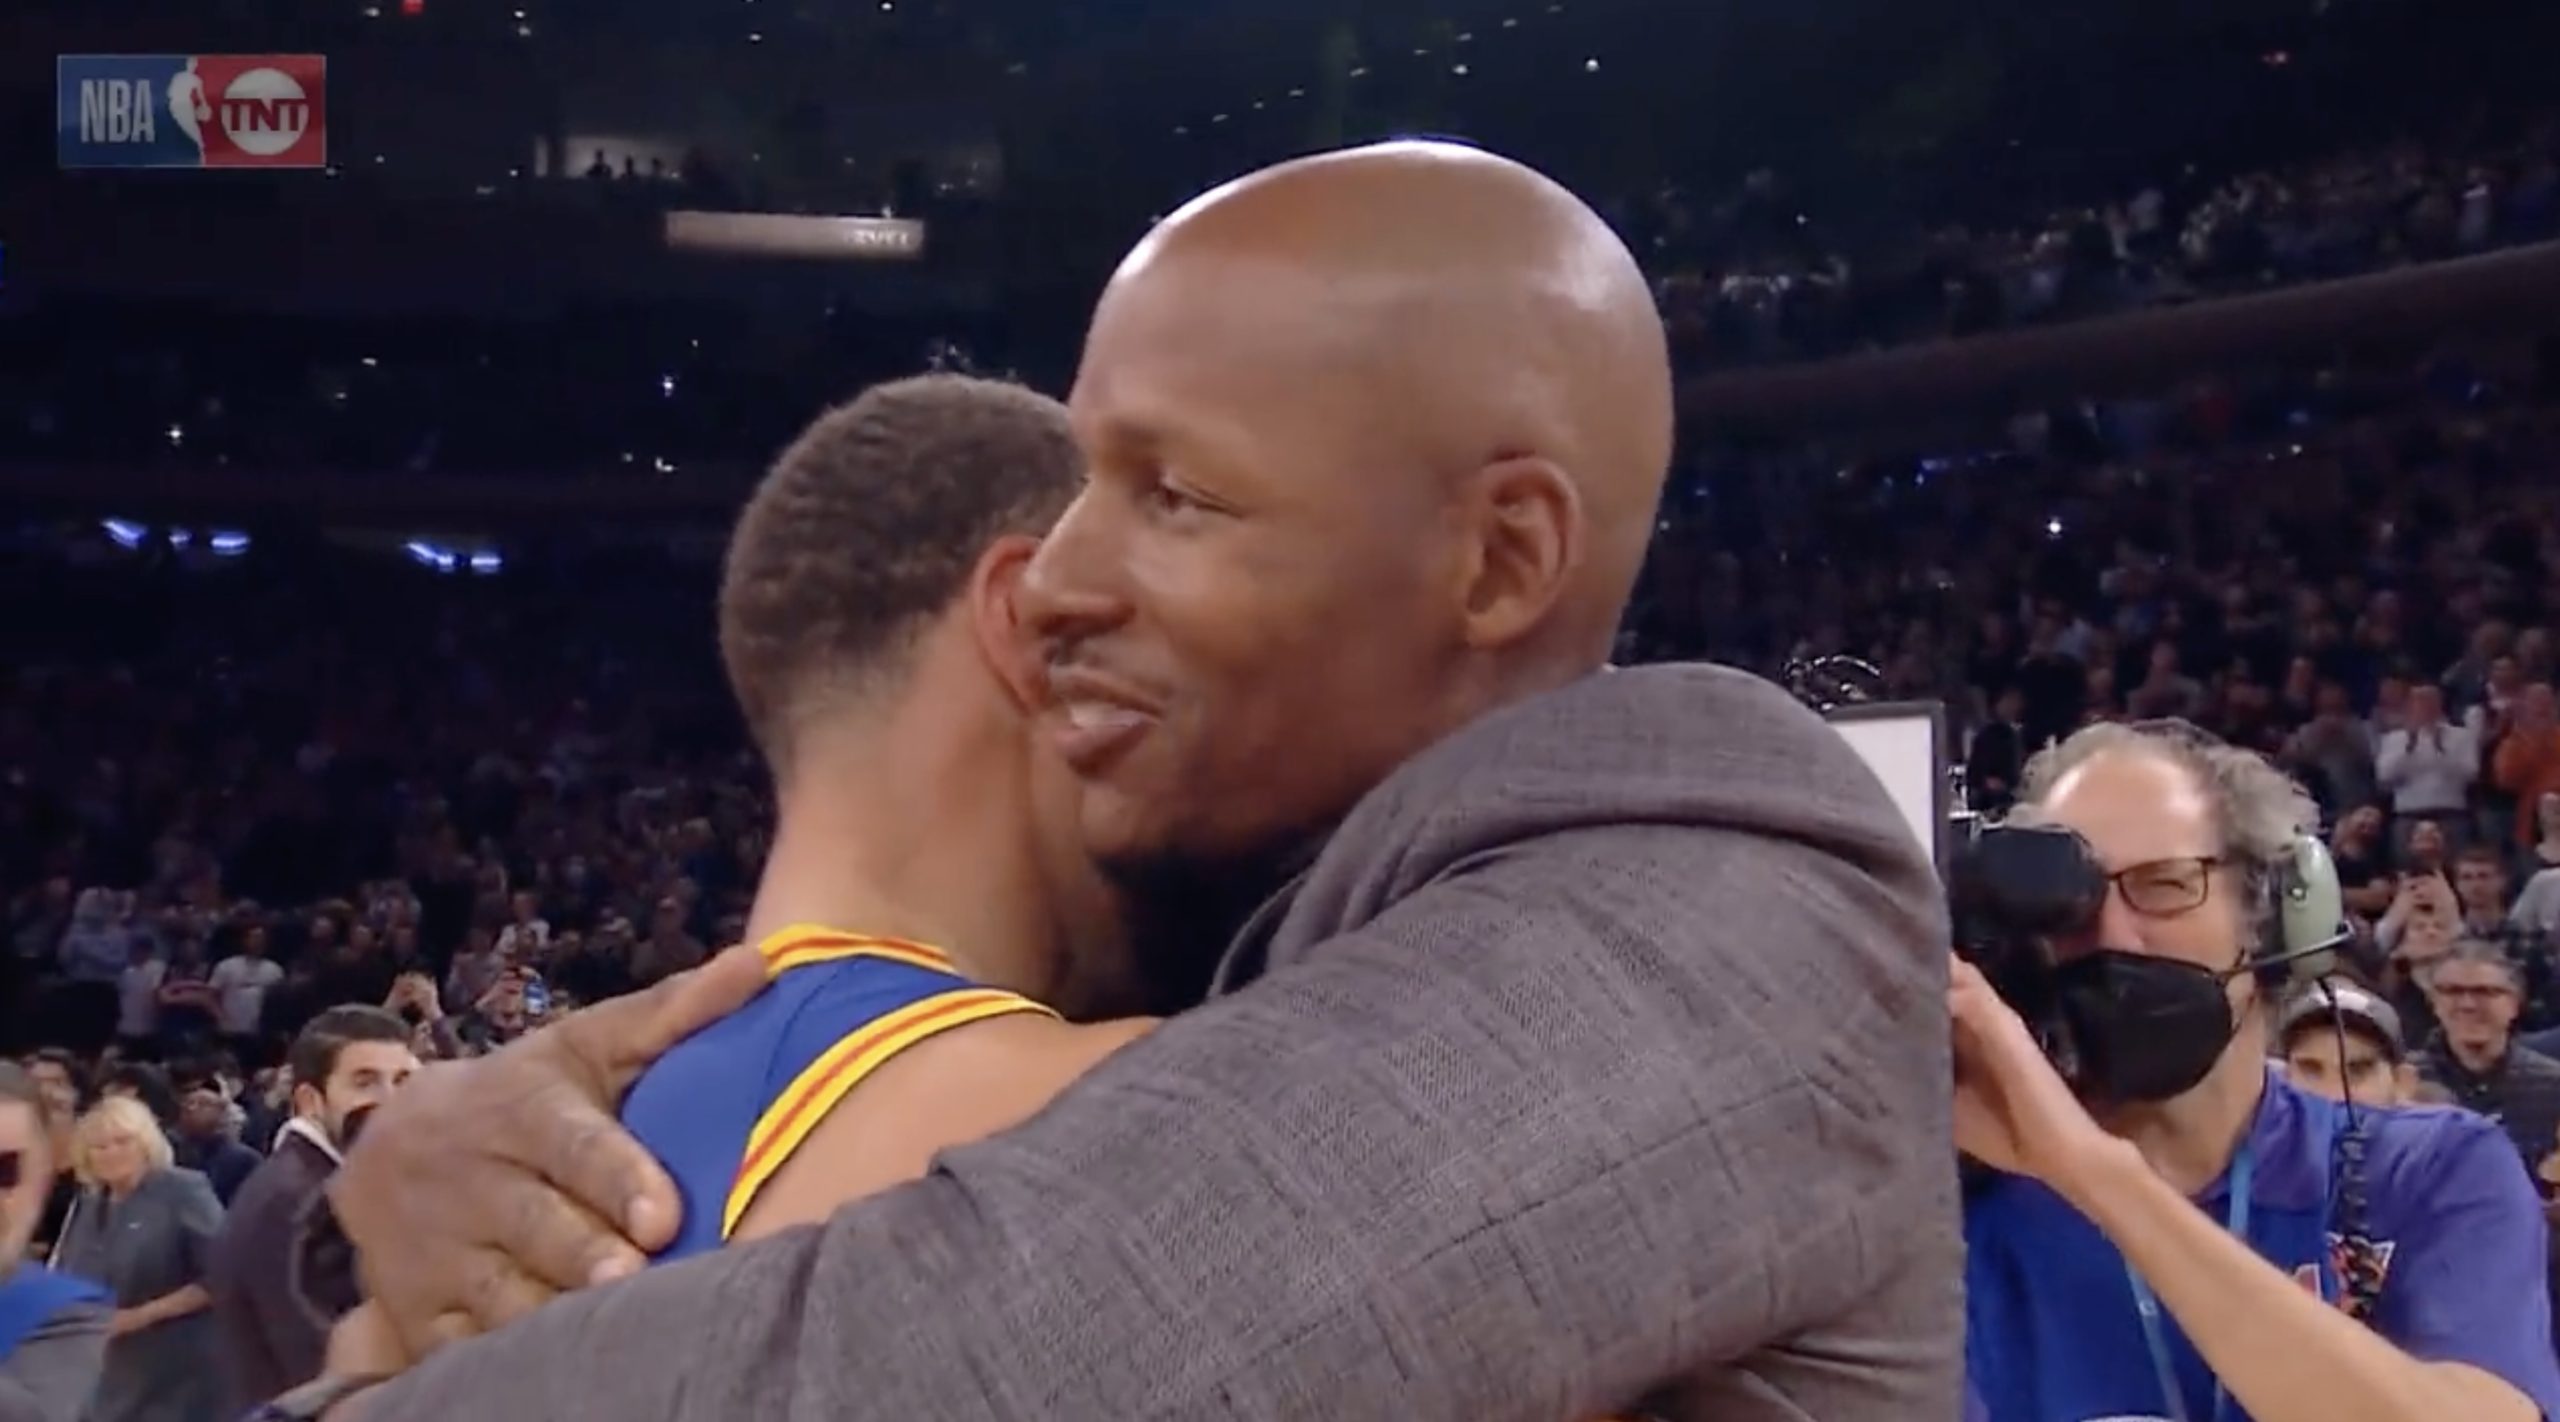 Ray Allen and Stephen Curry